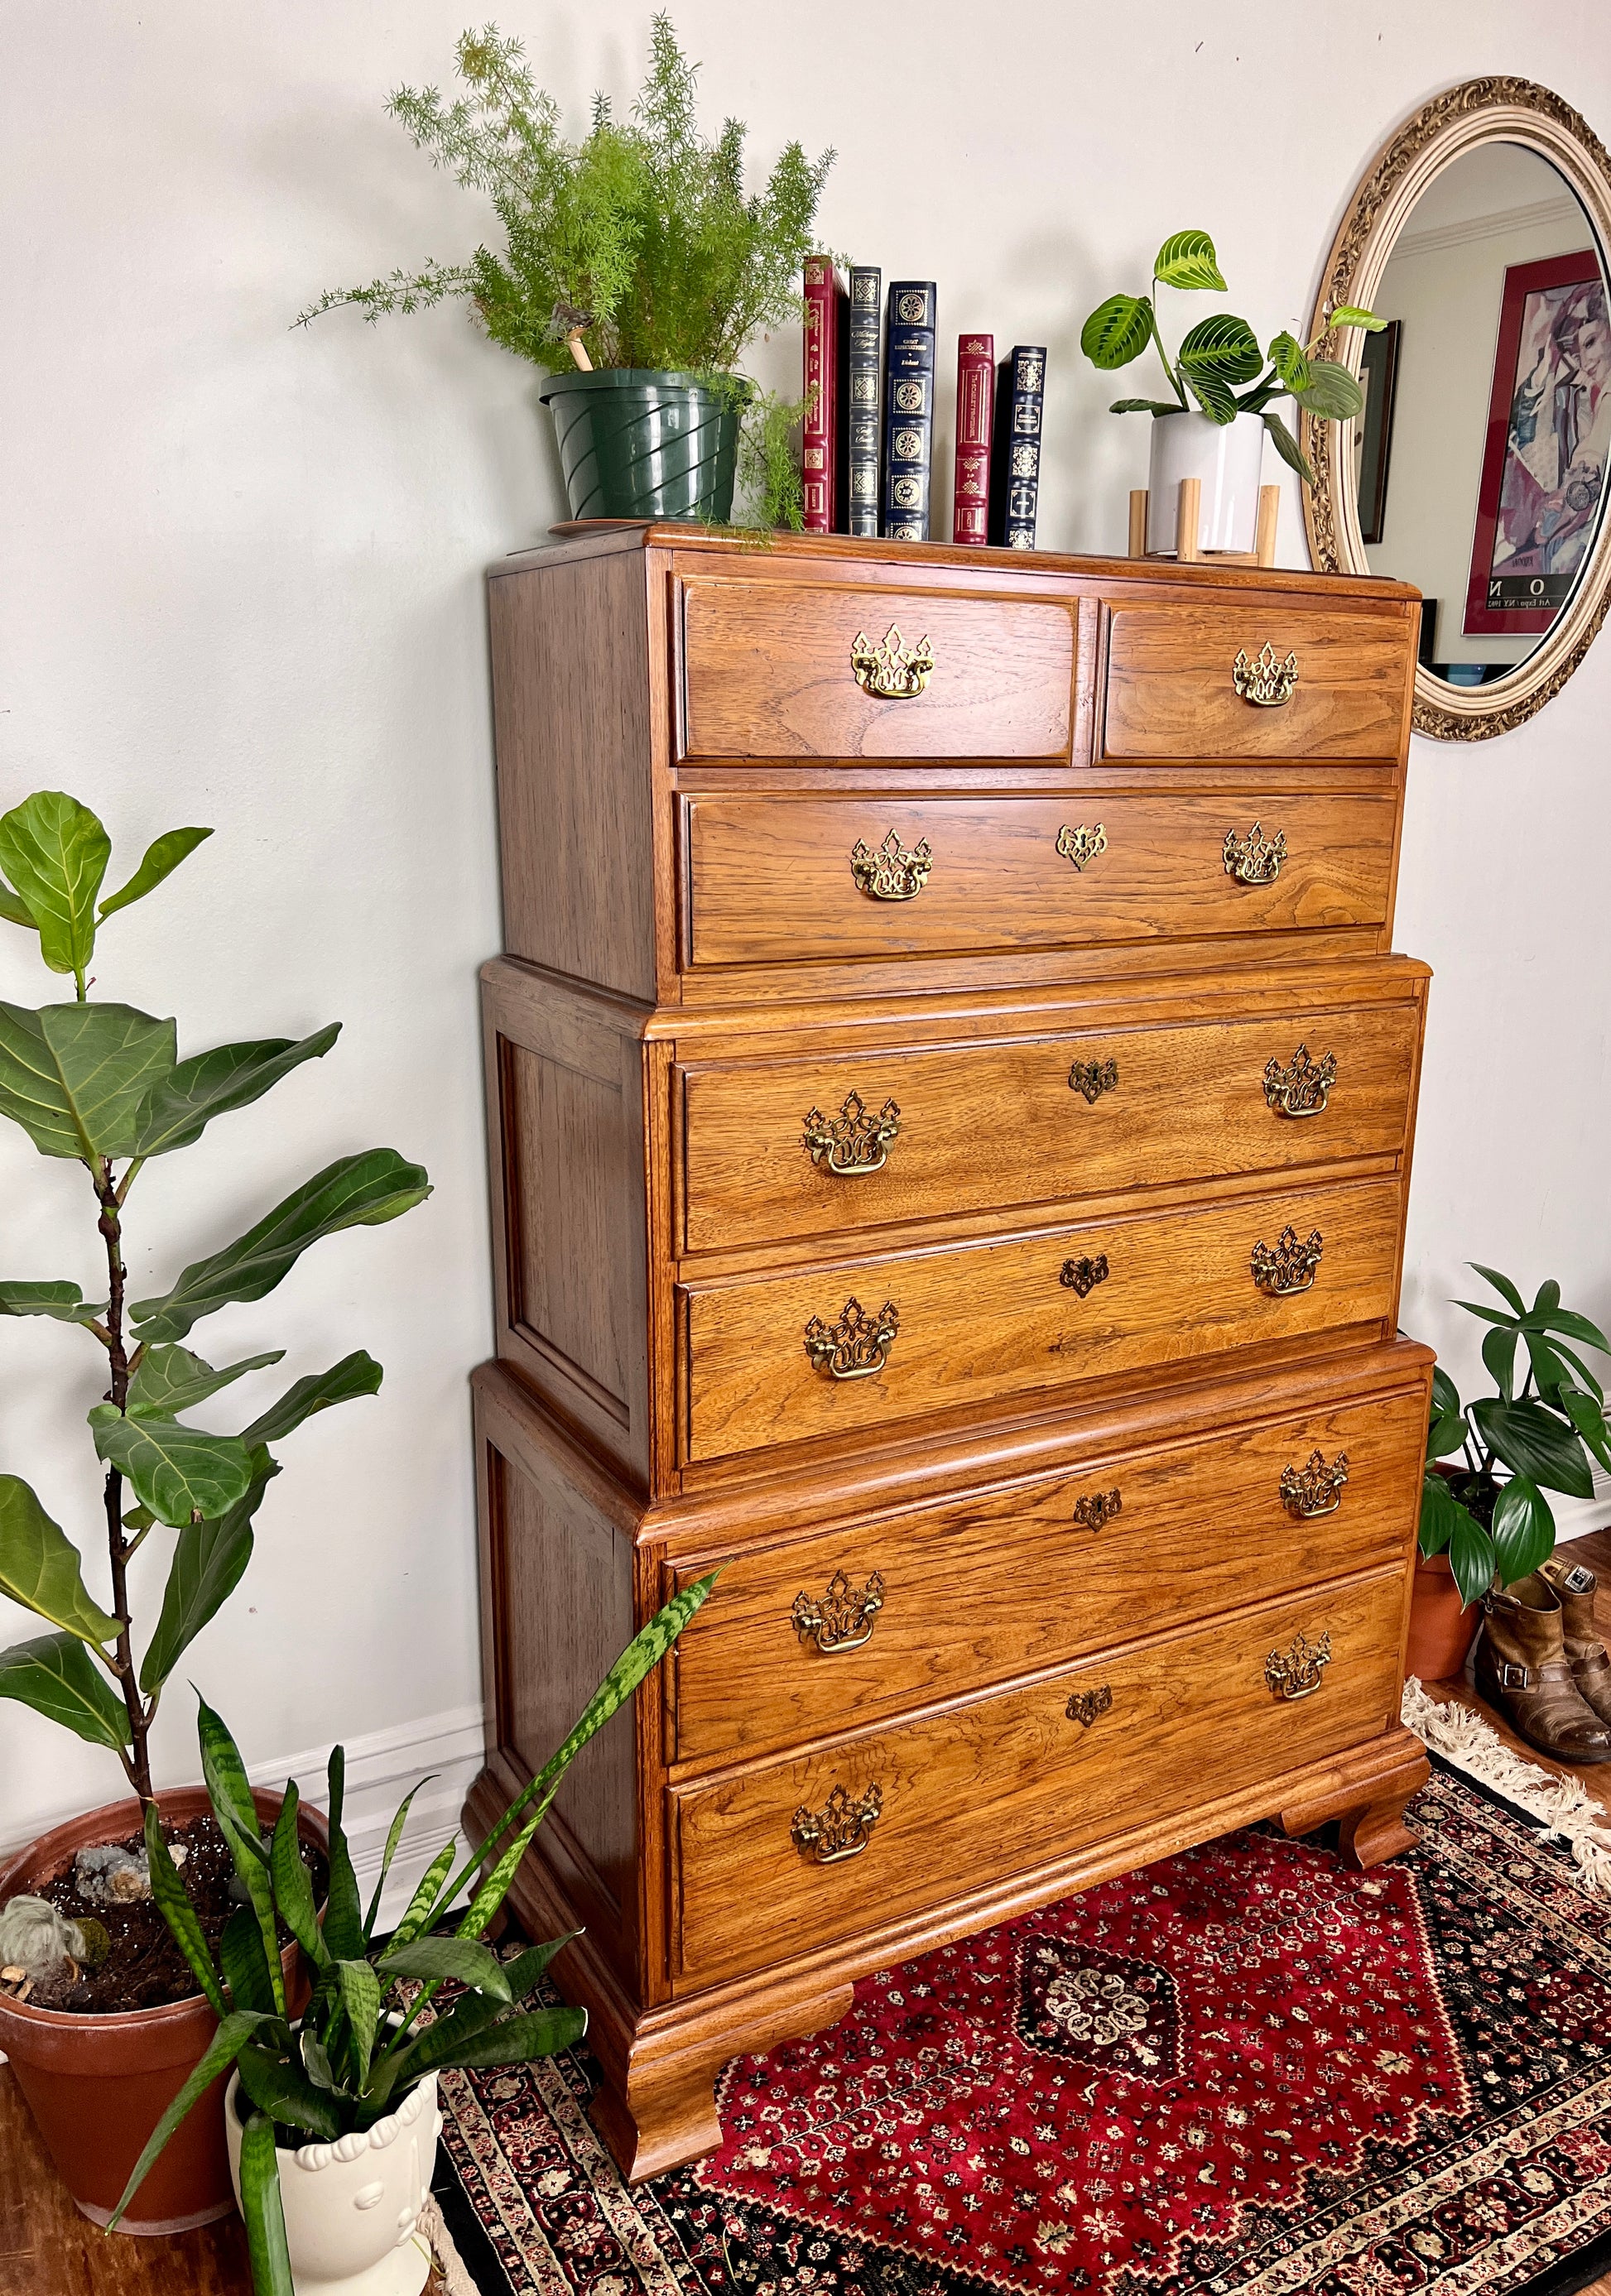 This is a vintage solid wood chest on chest tall boy dresser with seven drawers.